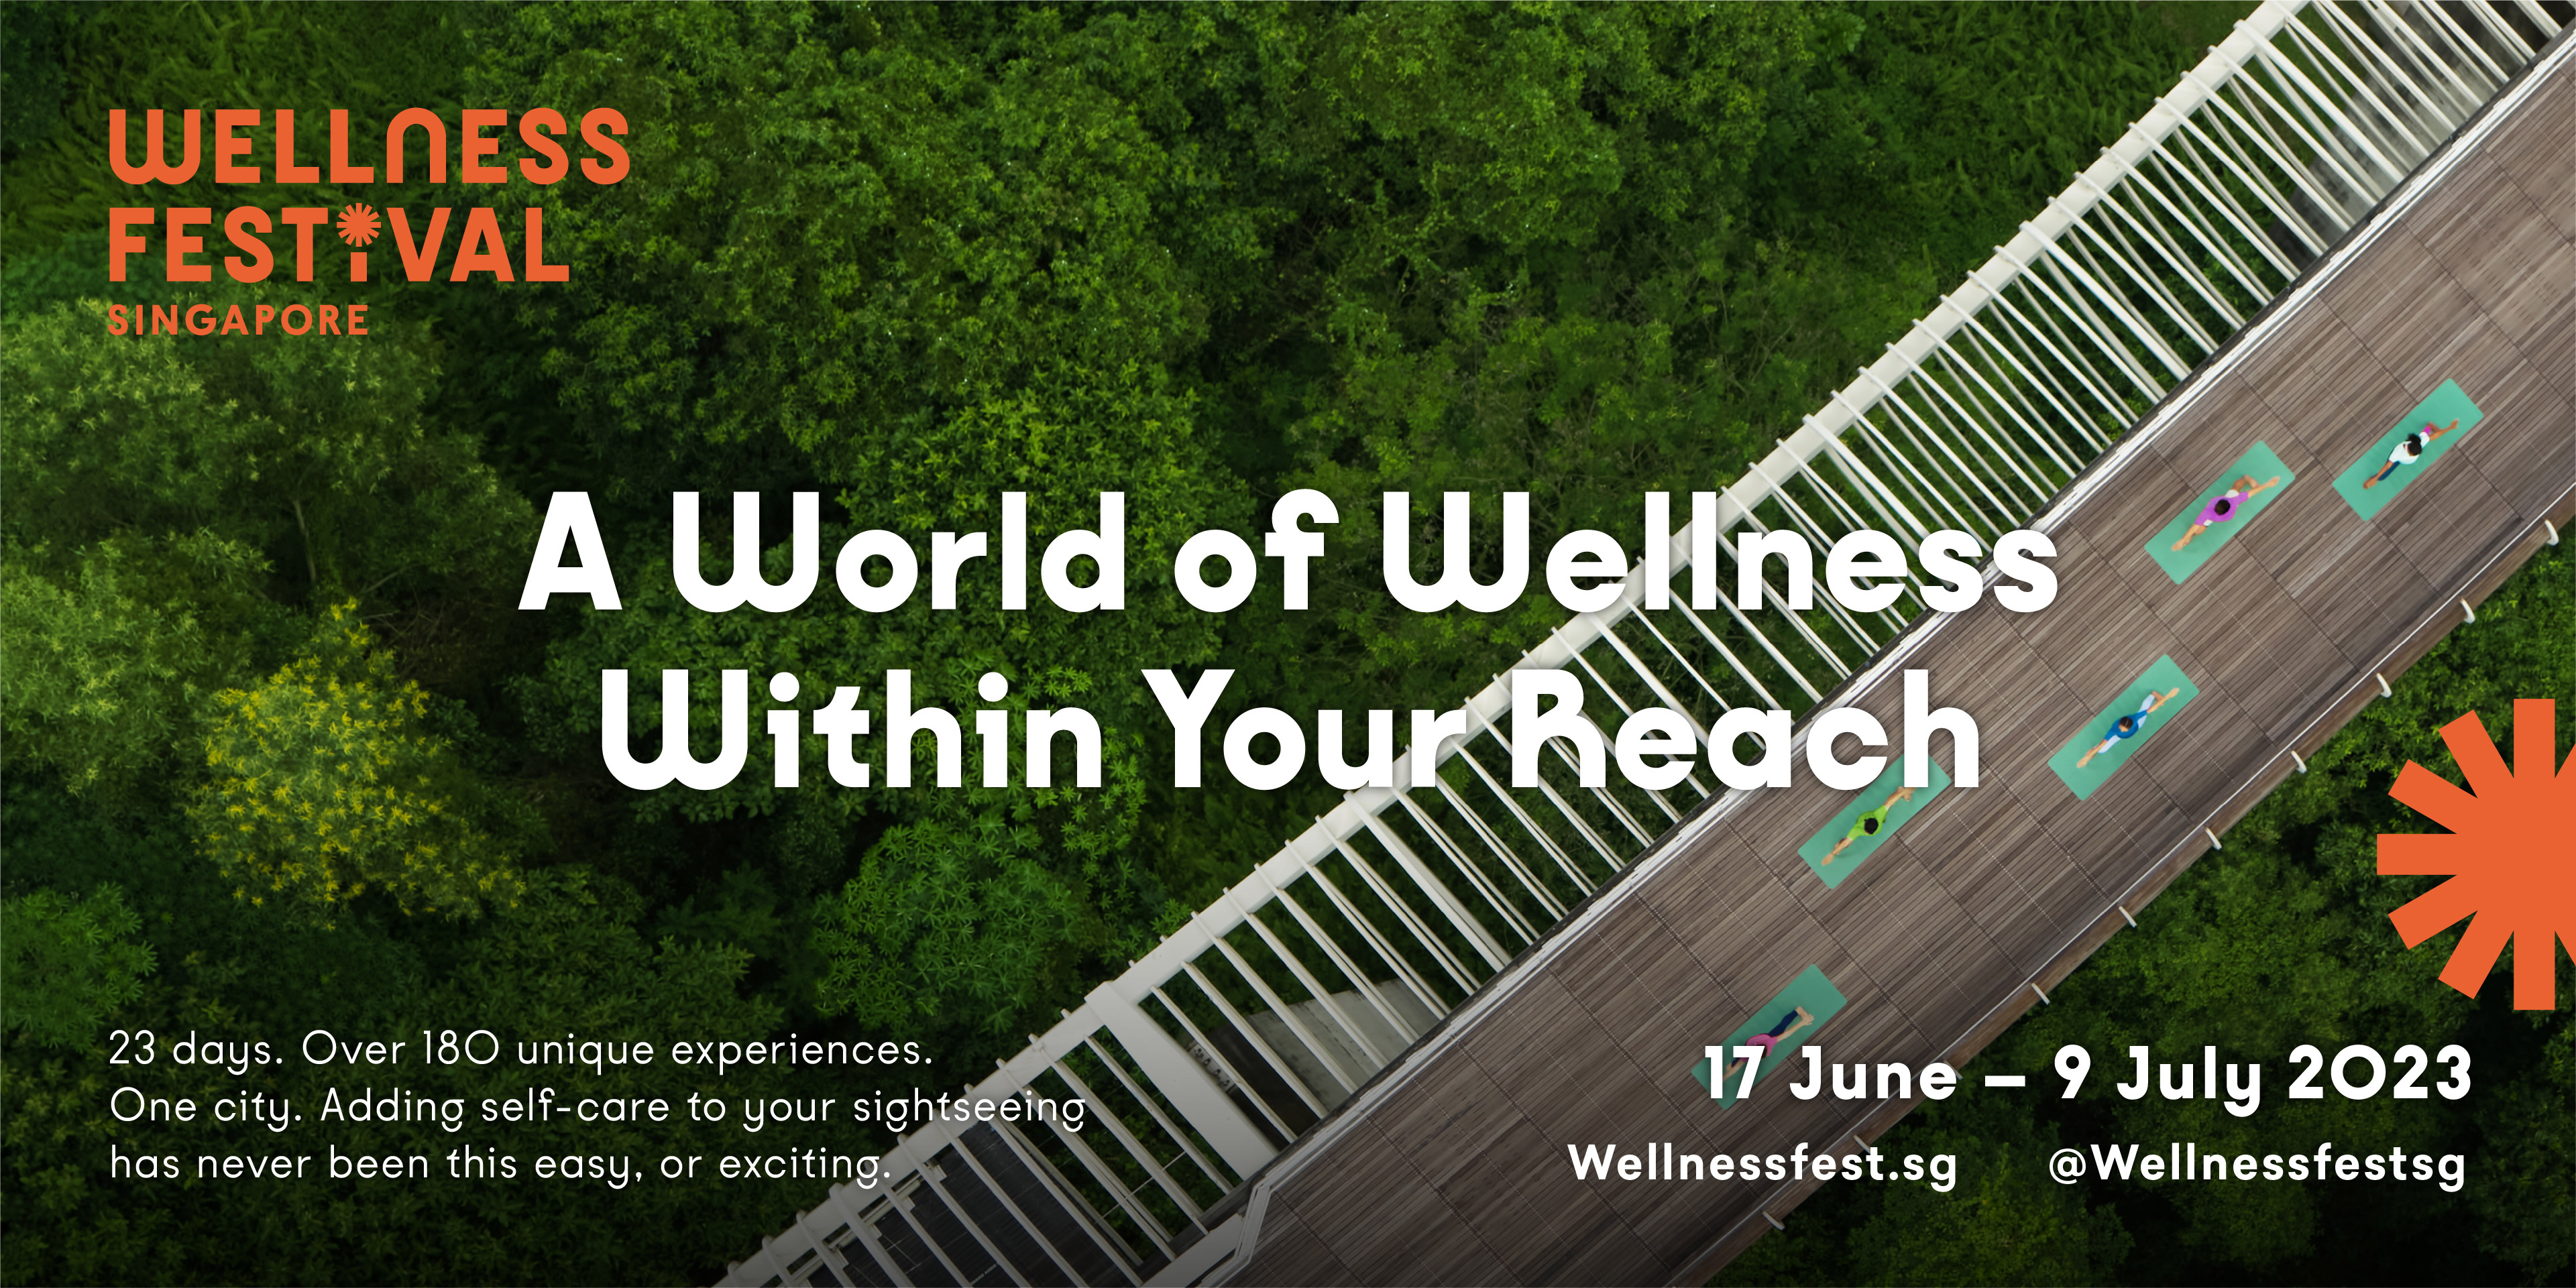 Singapore Tourism Board (STB) organised the Wellness Festival Singapore to promote 
holistic wellness in the City in Nature.